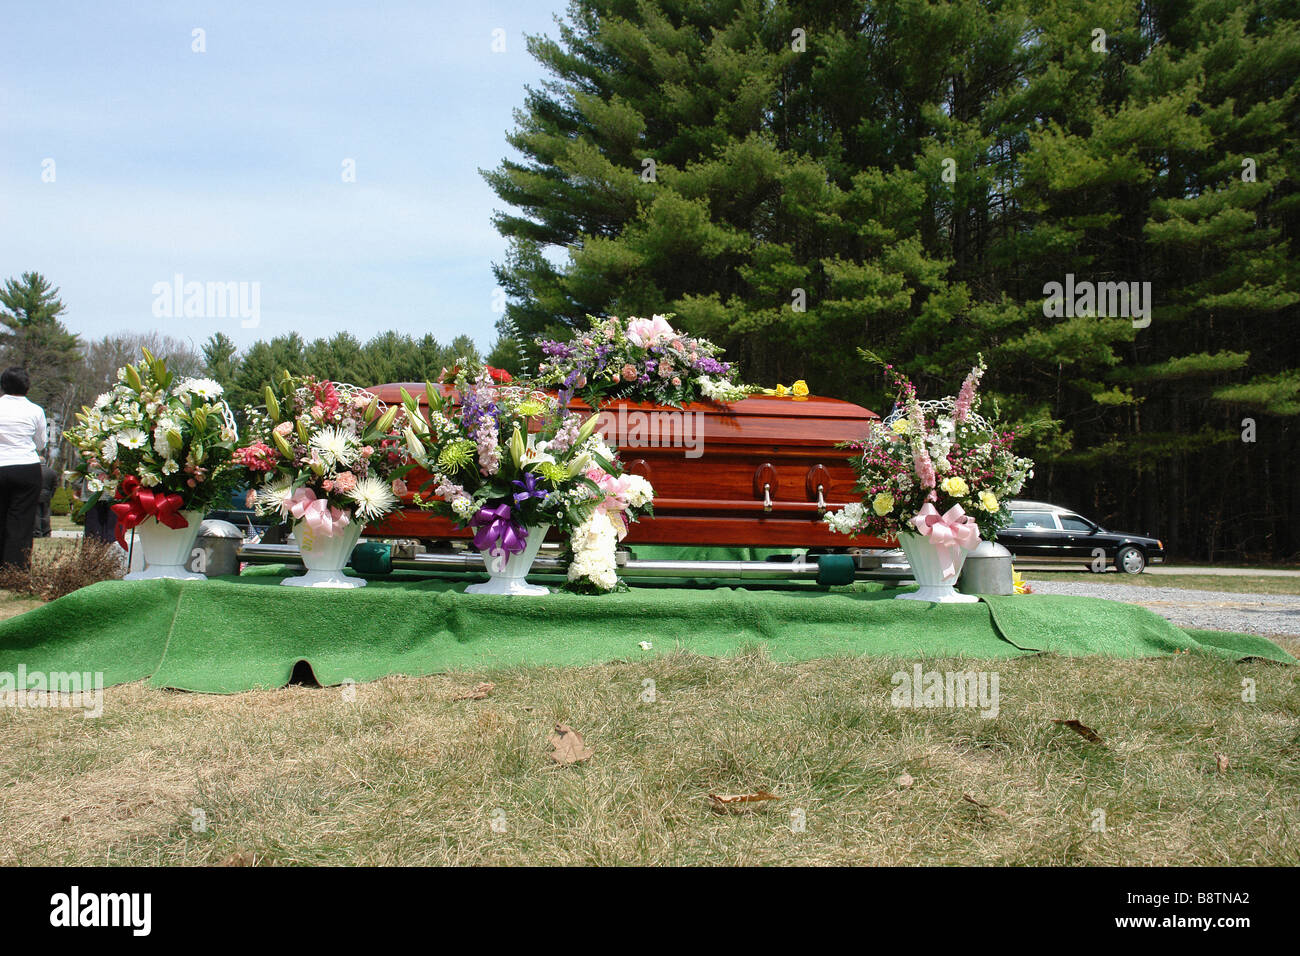 Wooden Casket and Flowers in a Cemetery Copy Space Stock Photo